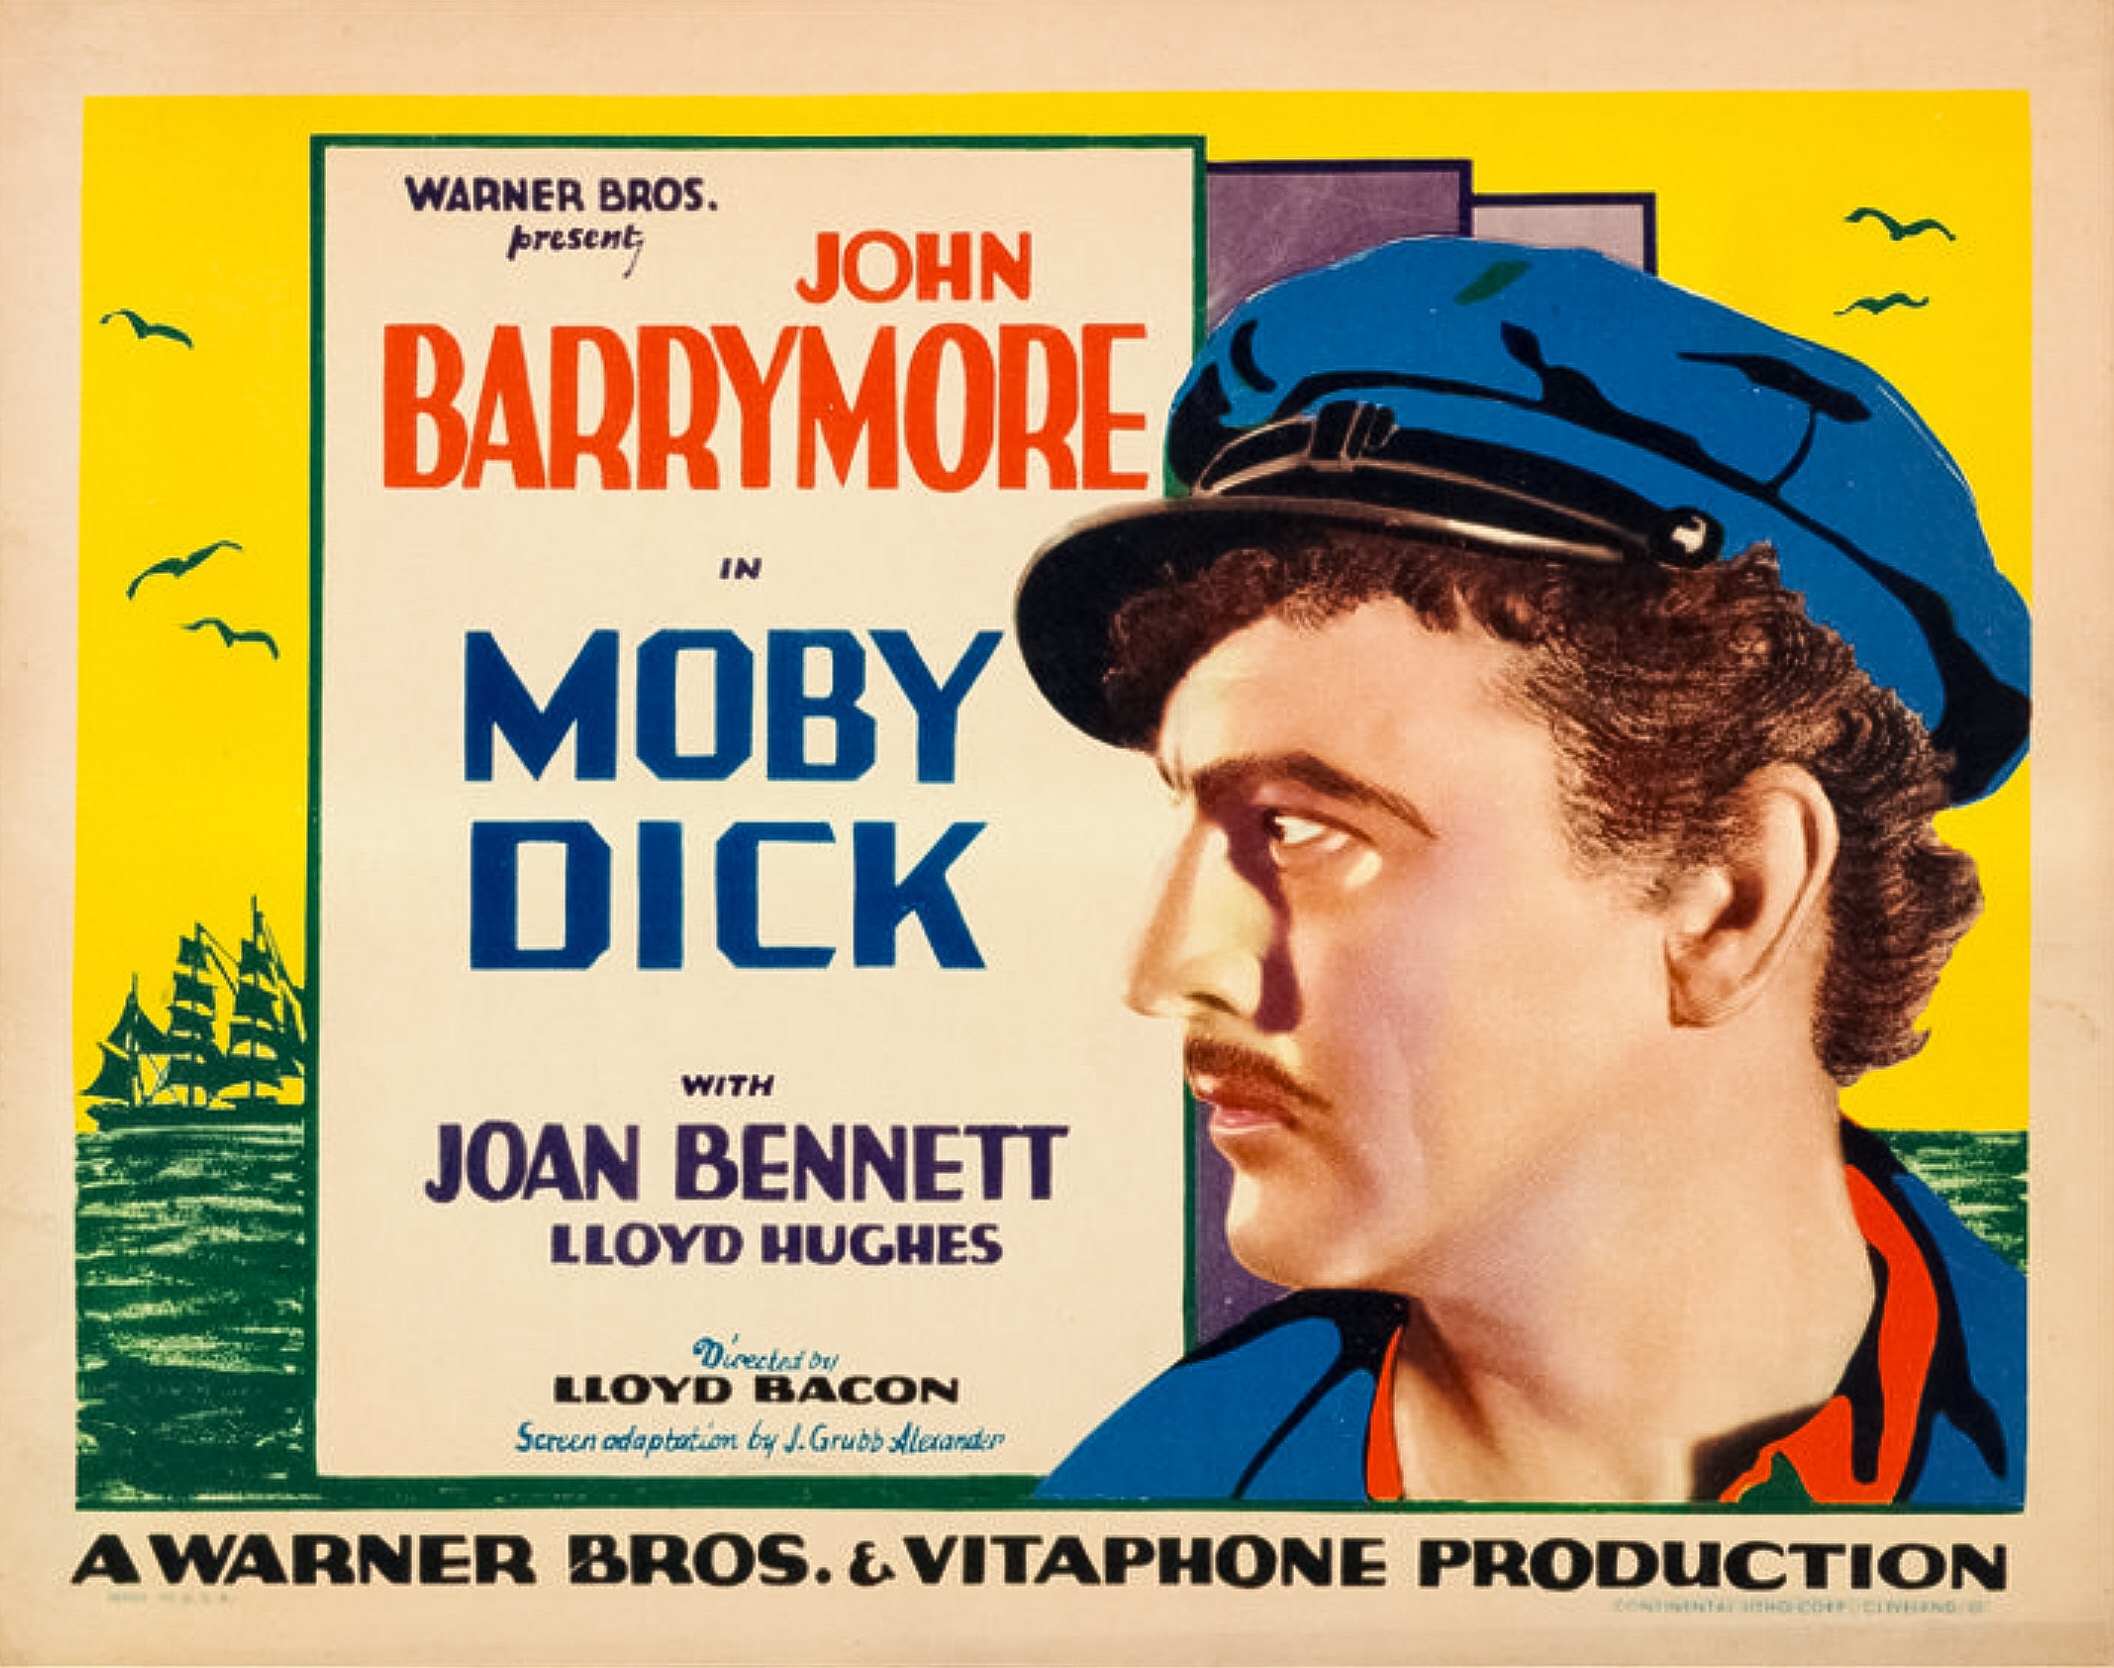 John Barrymore in the Warner Brother's production of Moby Dick 1930